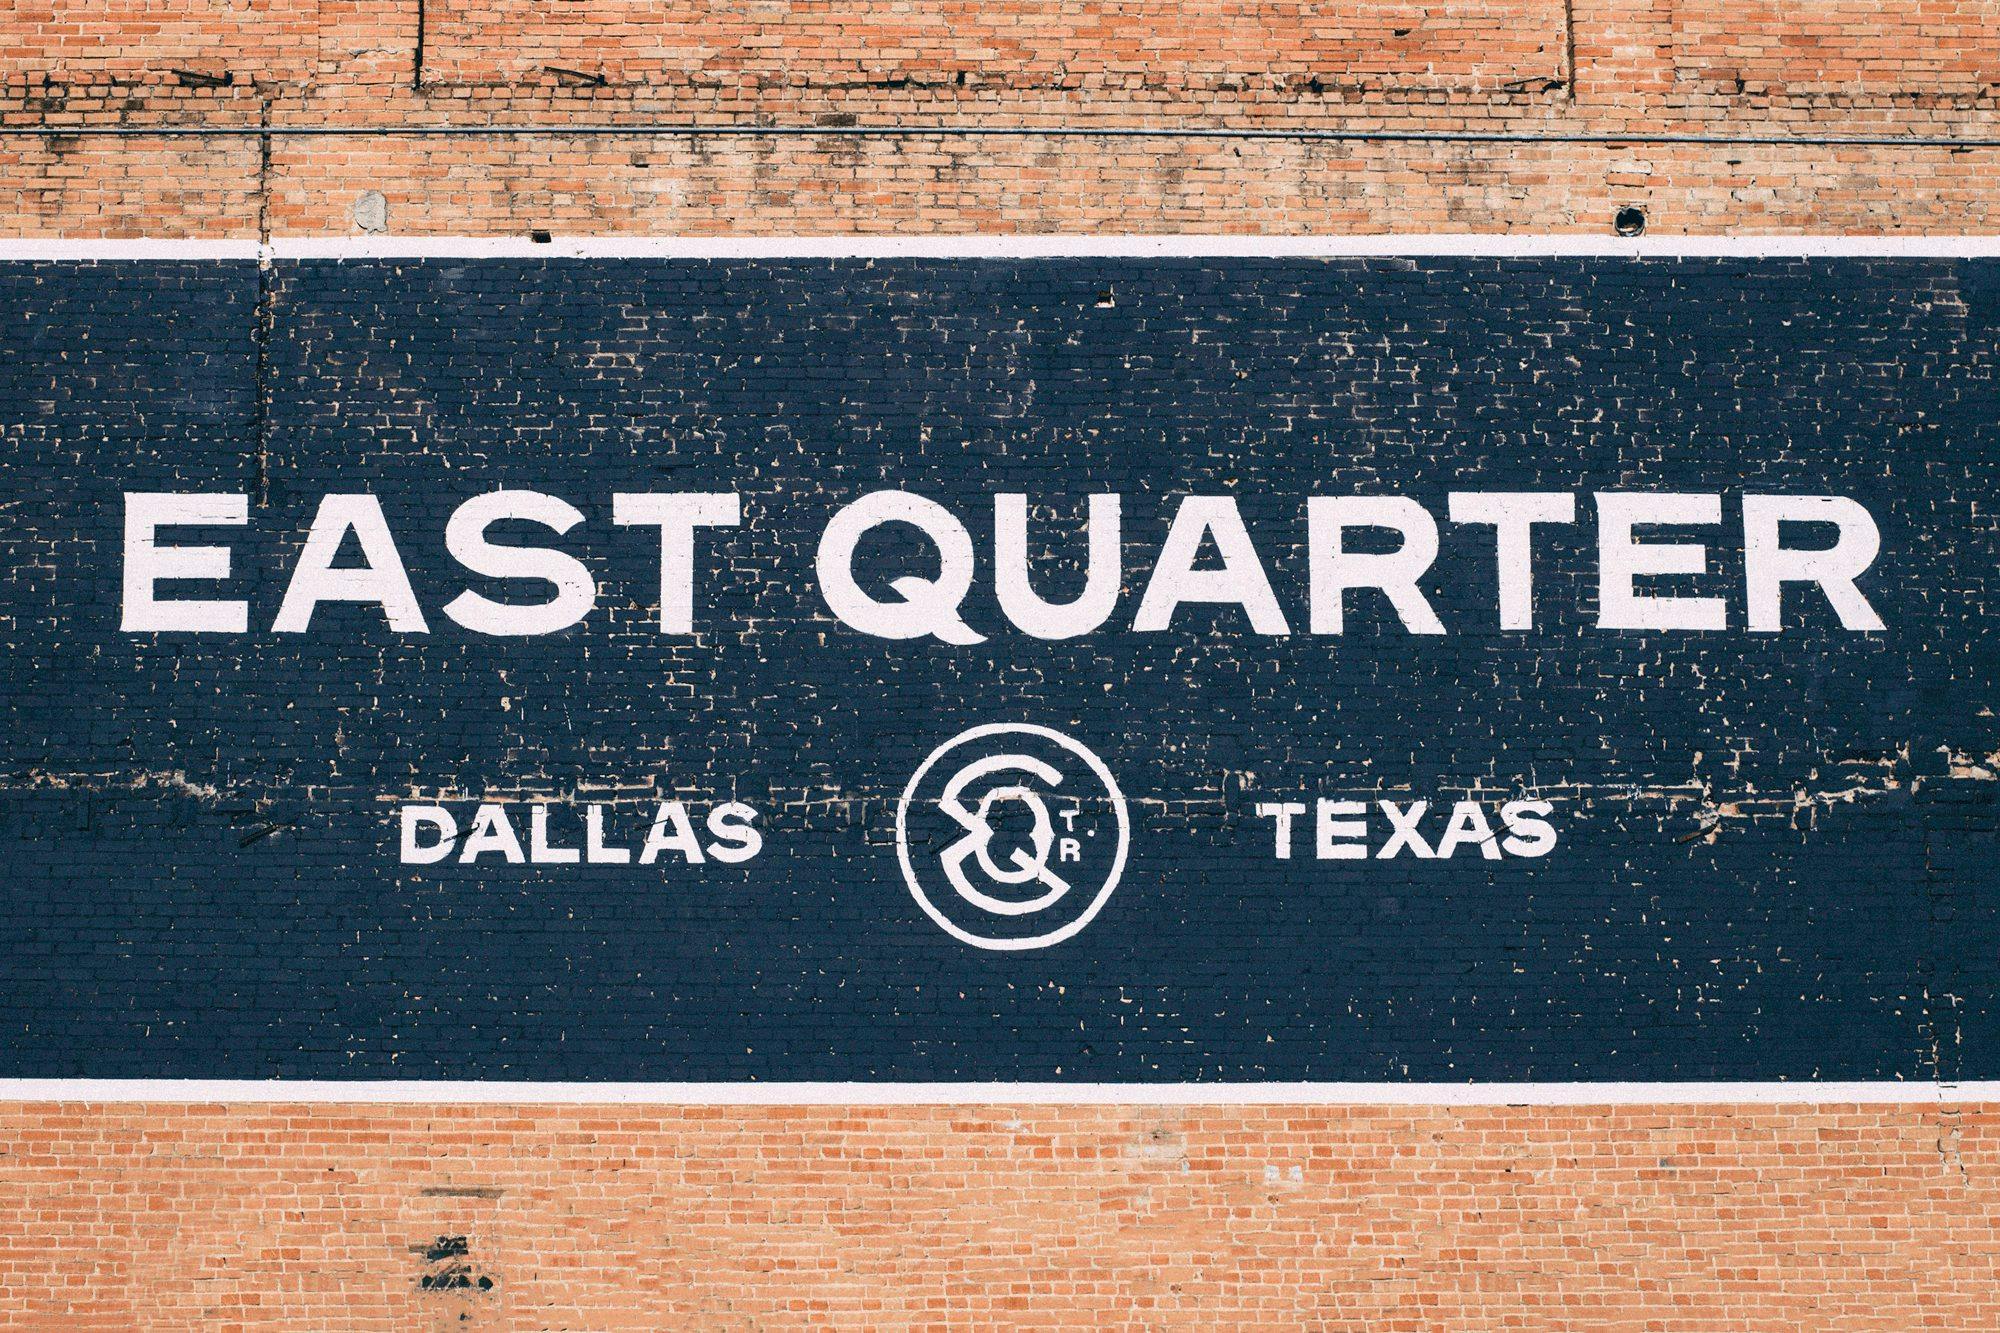 East Quarter, Dallas, Texas painted on a brick wall